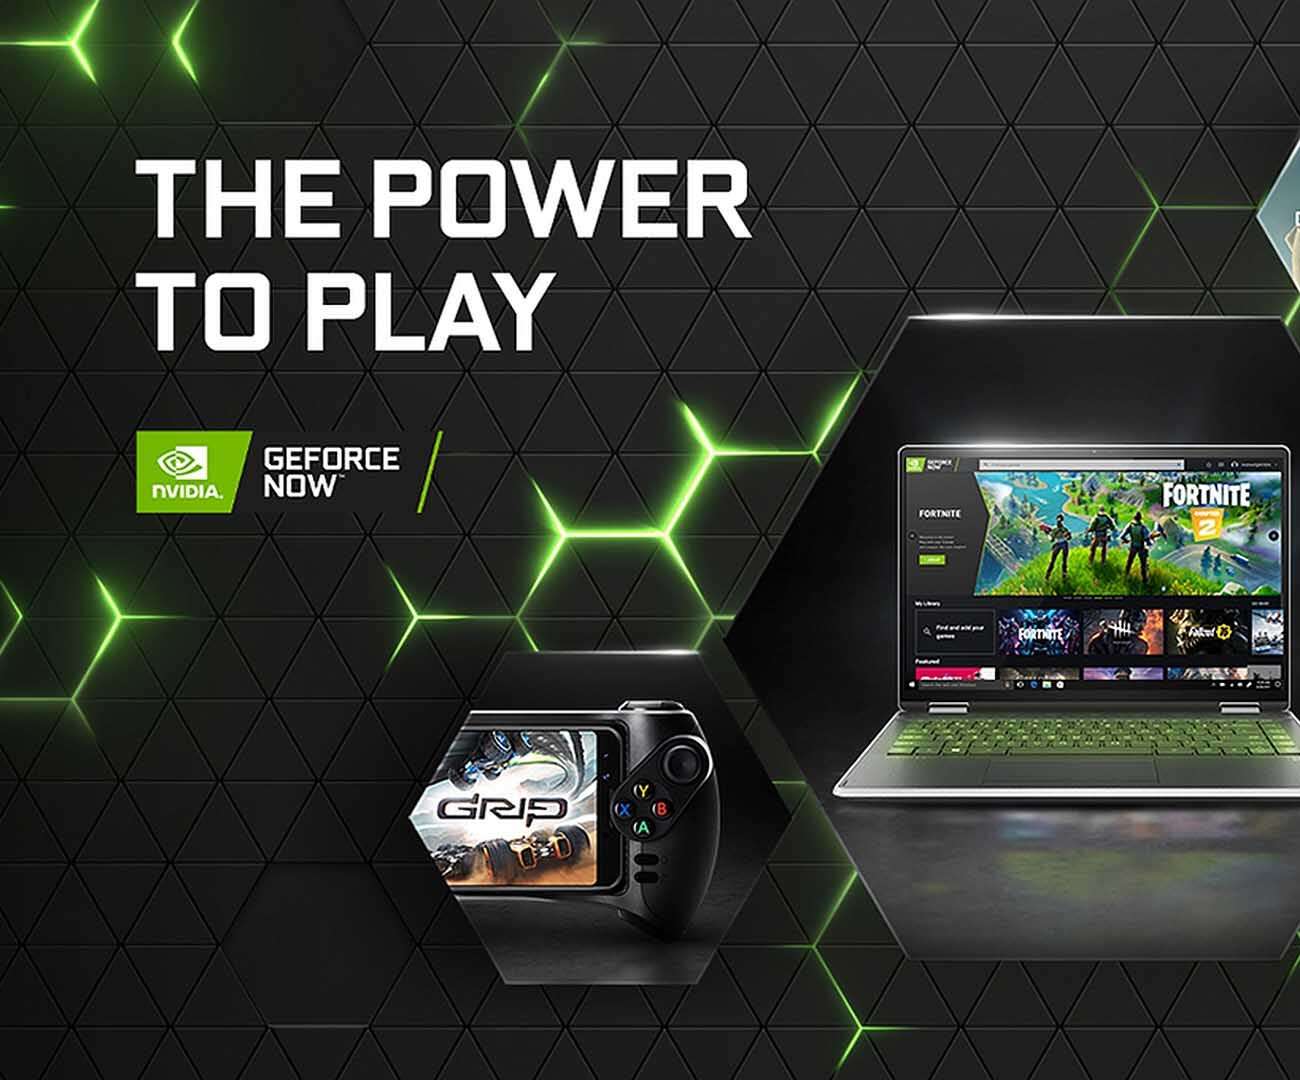 gefroce now, nvidia streaming, gry geforce now